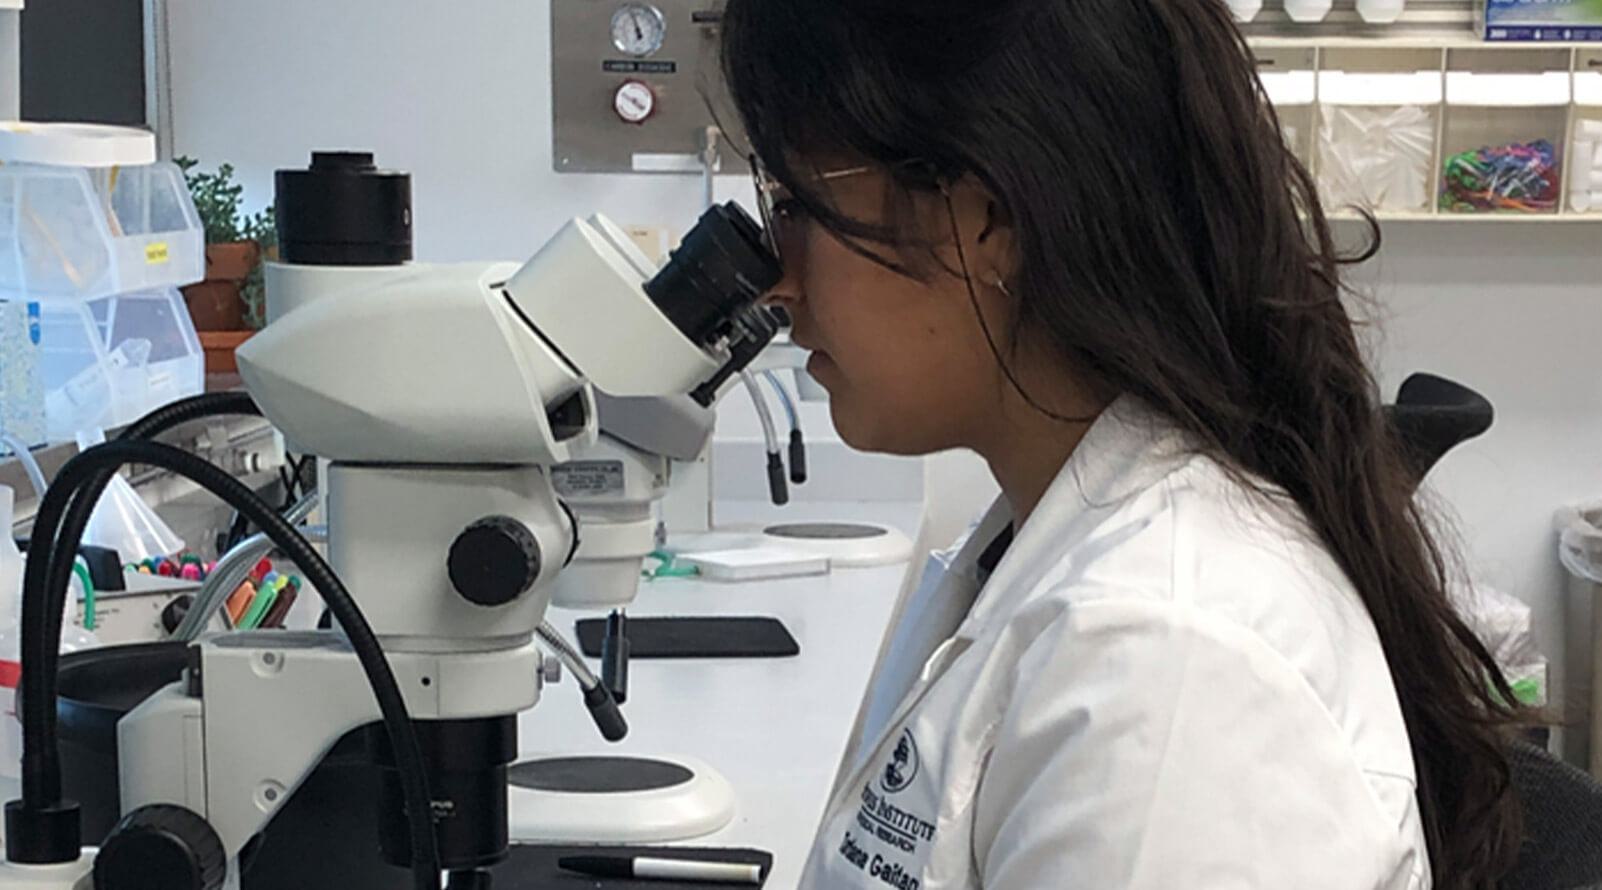 Scientist looking into a microscope